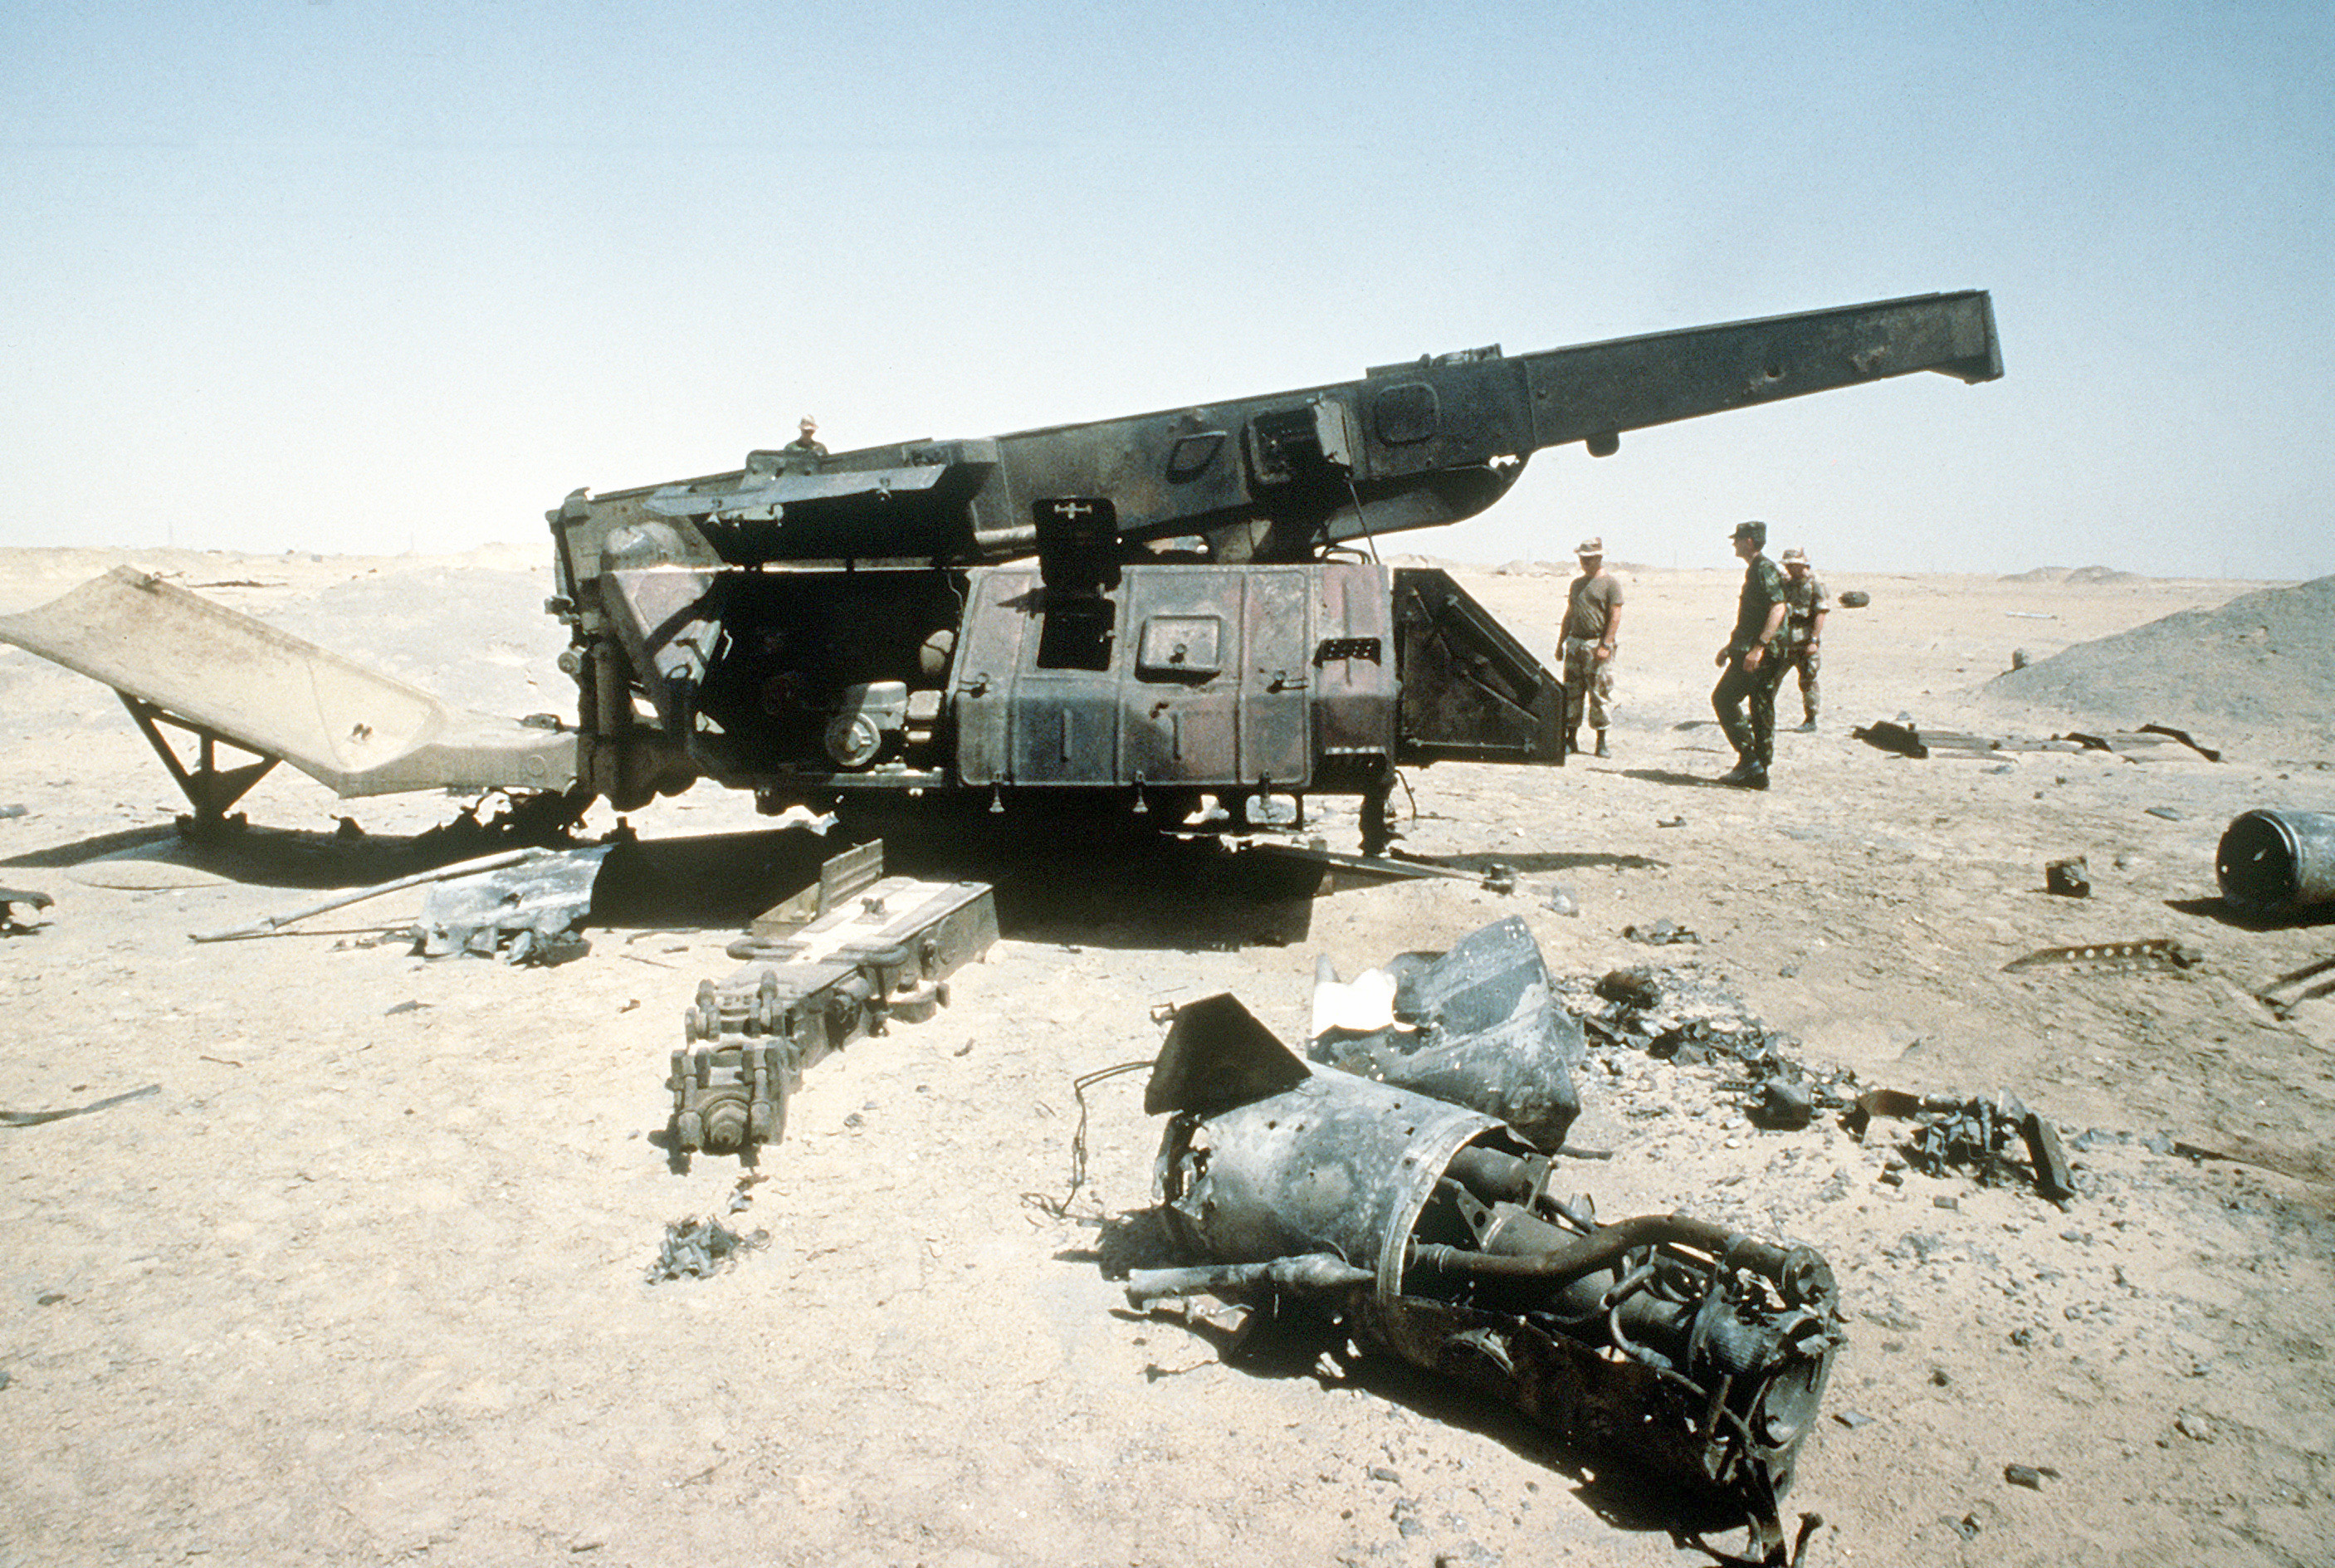 Soldiers examine an SA-2 missile site that was destroyed during Desert Storm. (U.S. Air Force)